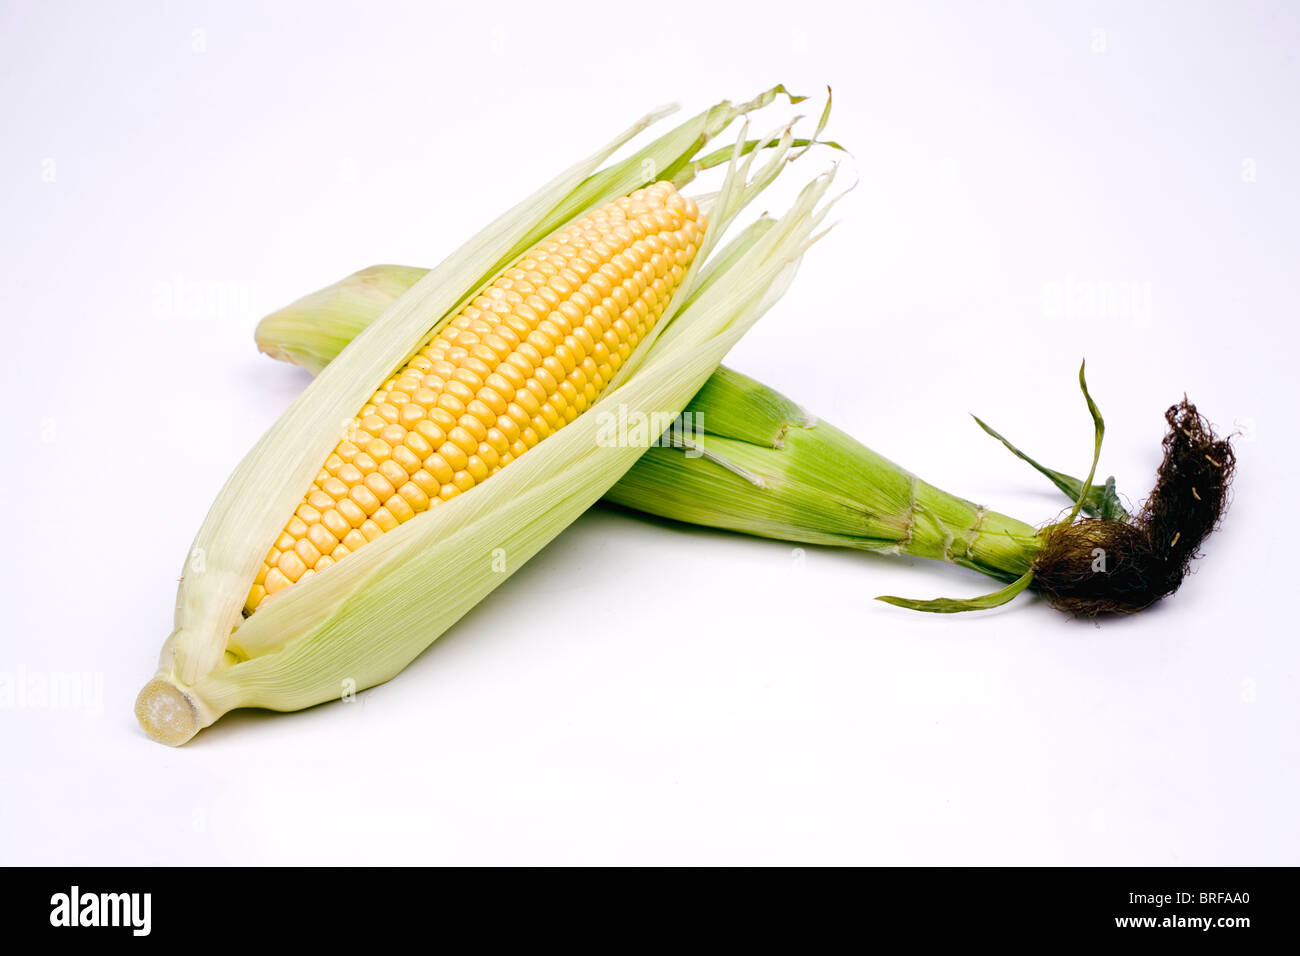 Two corn cobs against white background Stock Photo